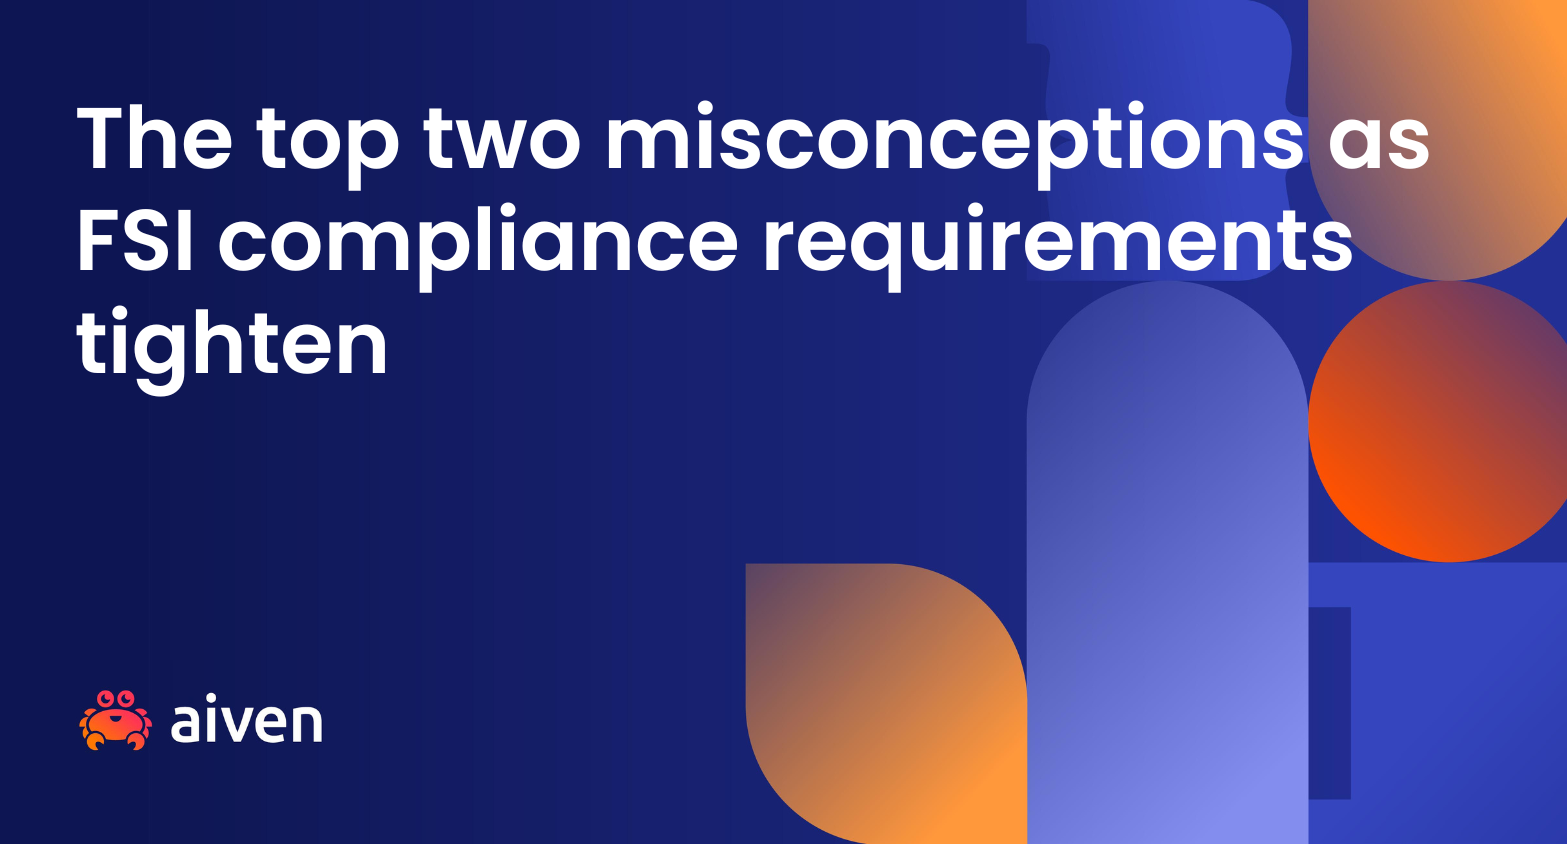 The Top Two Misconceptions as FSI Compliance Requirements Tighten illustration